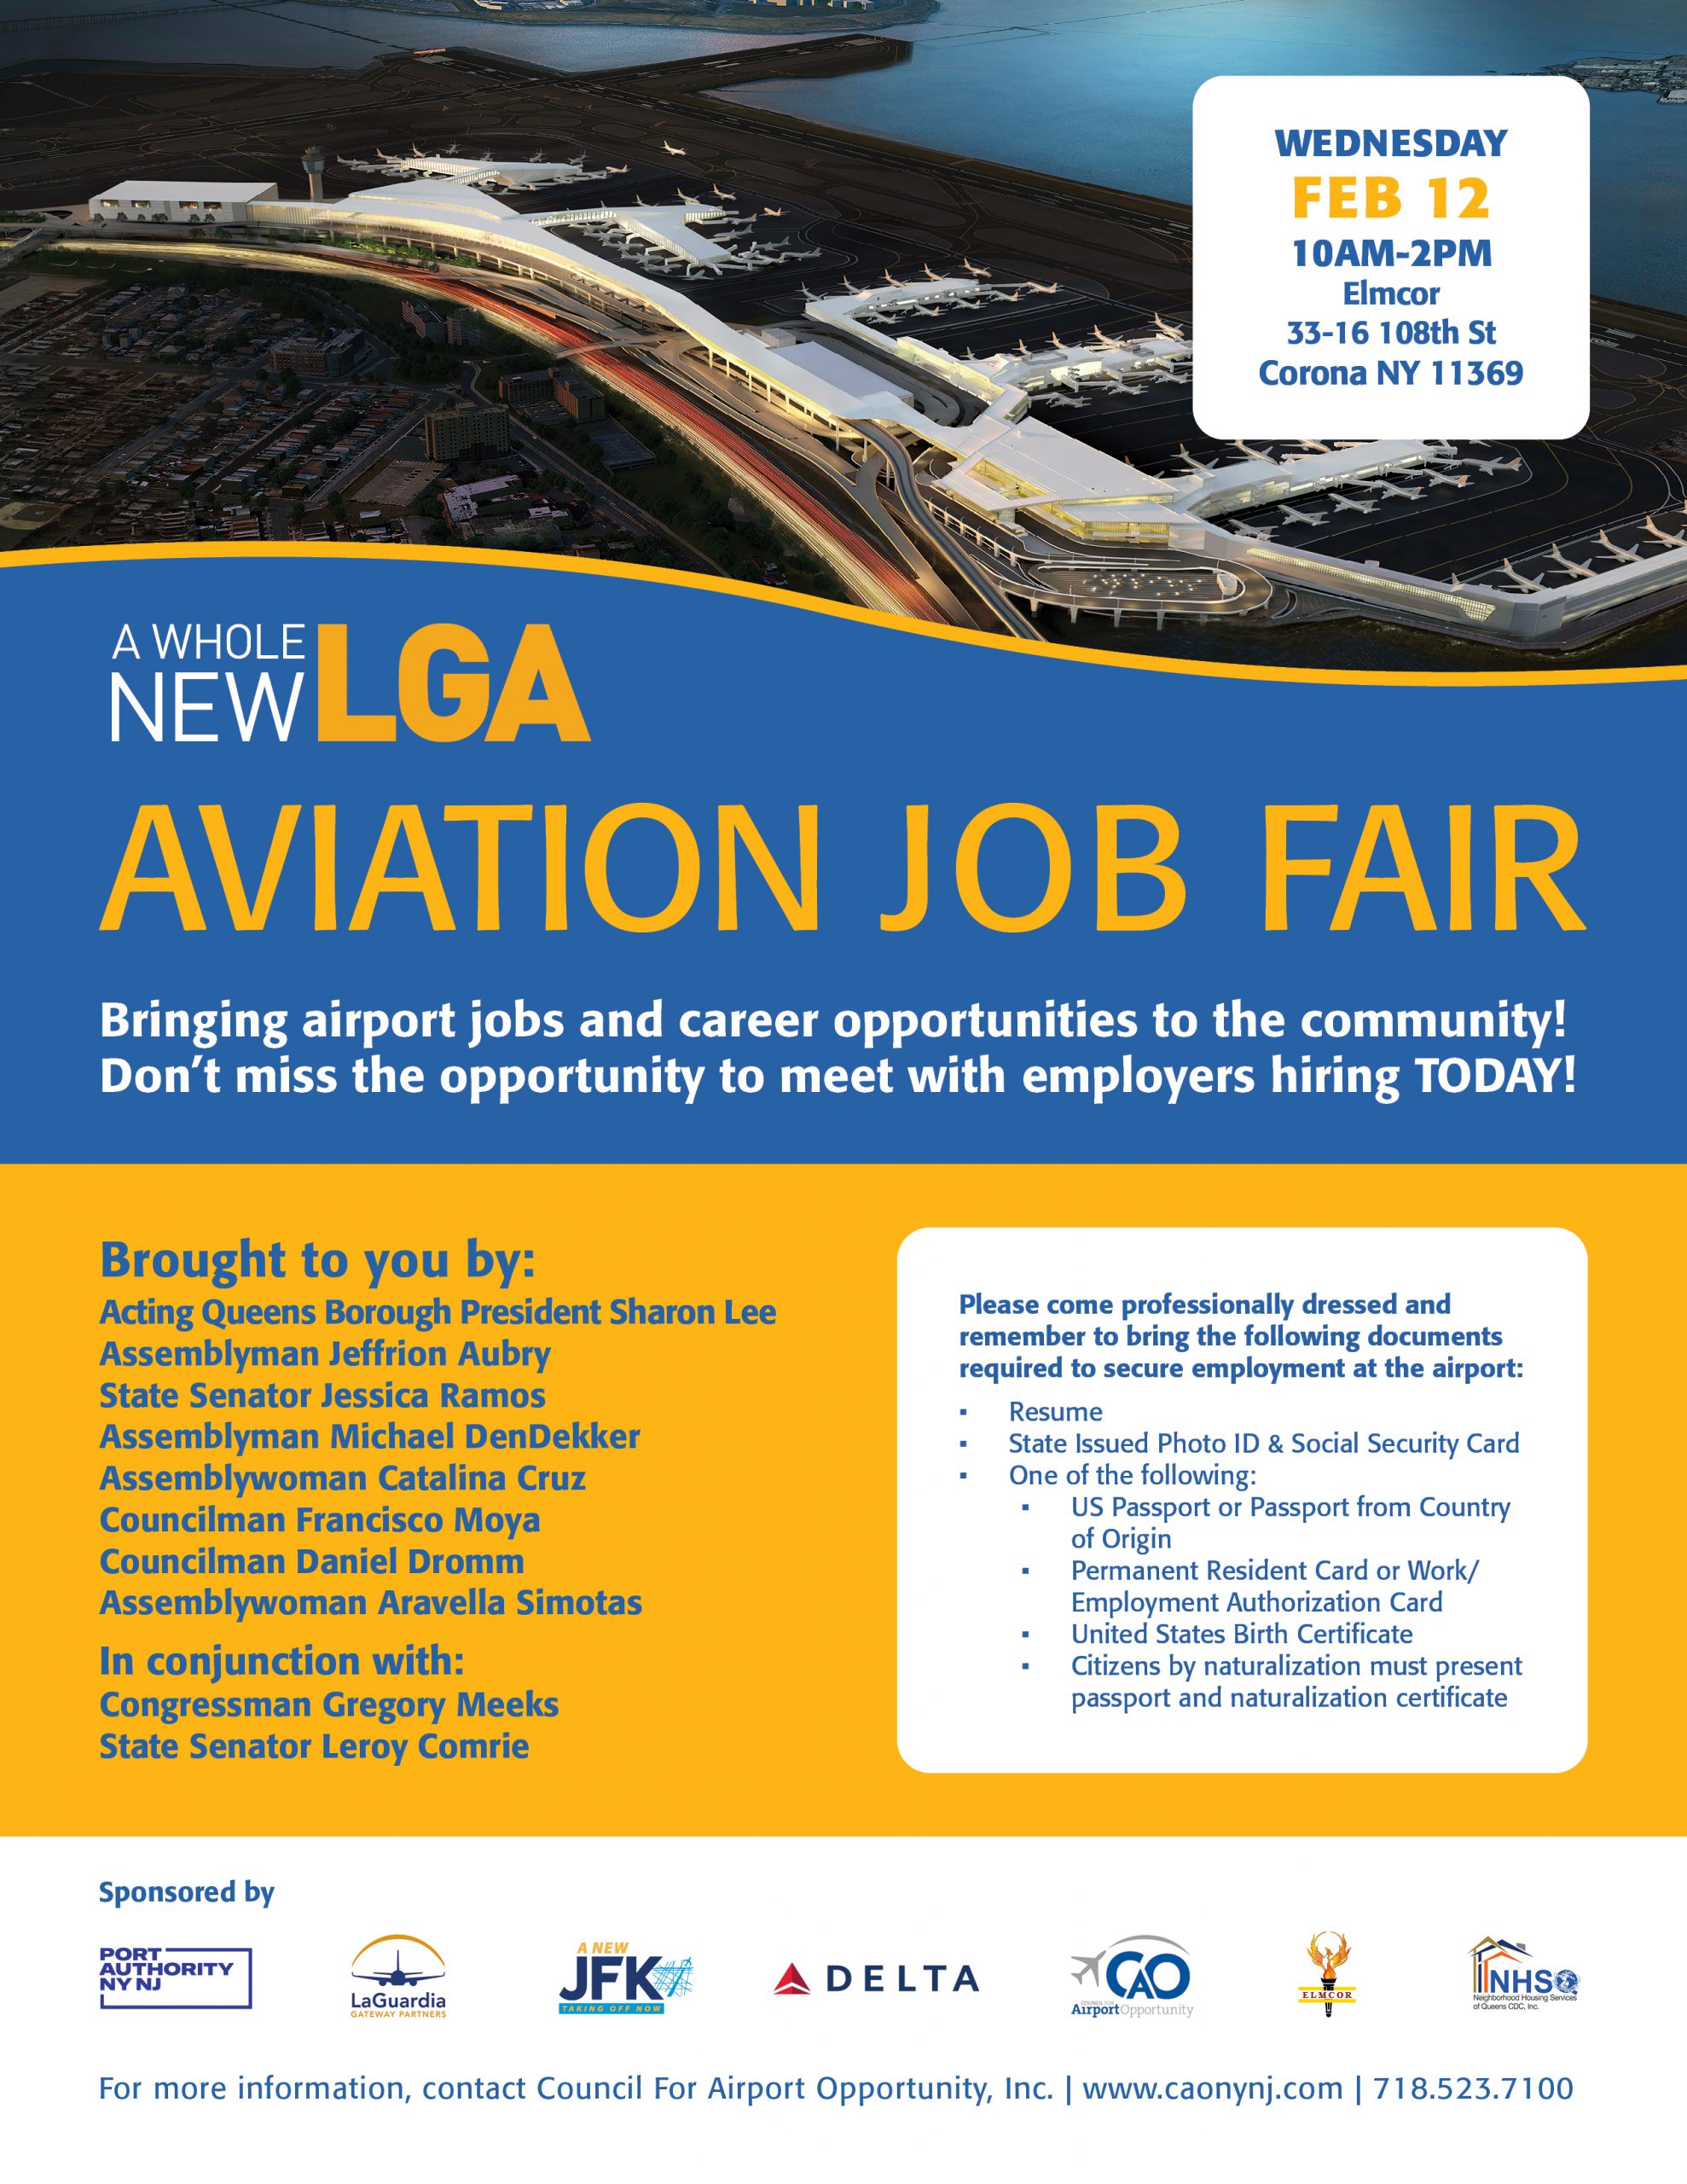 Aviation Job Fair at Elmcor on February 12th 2020 10am to 2pm